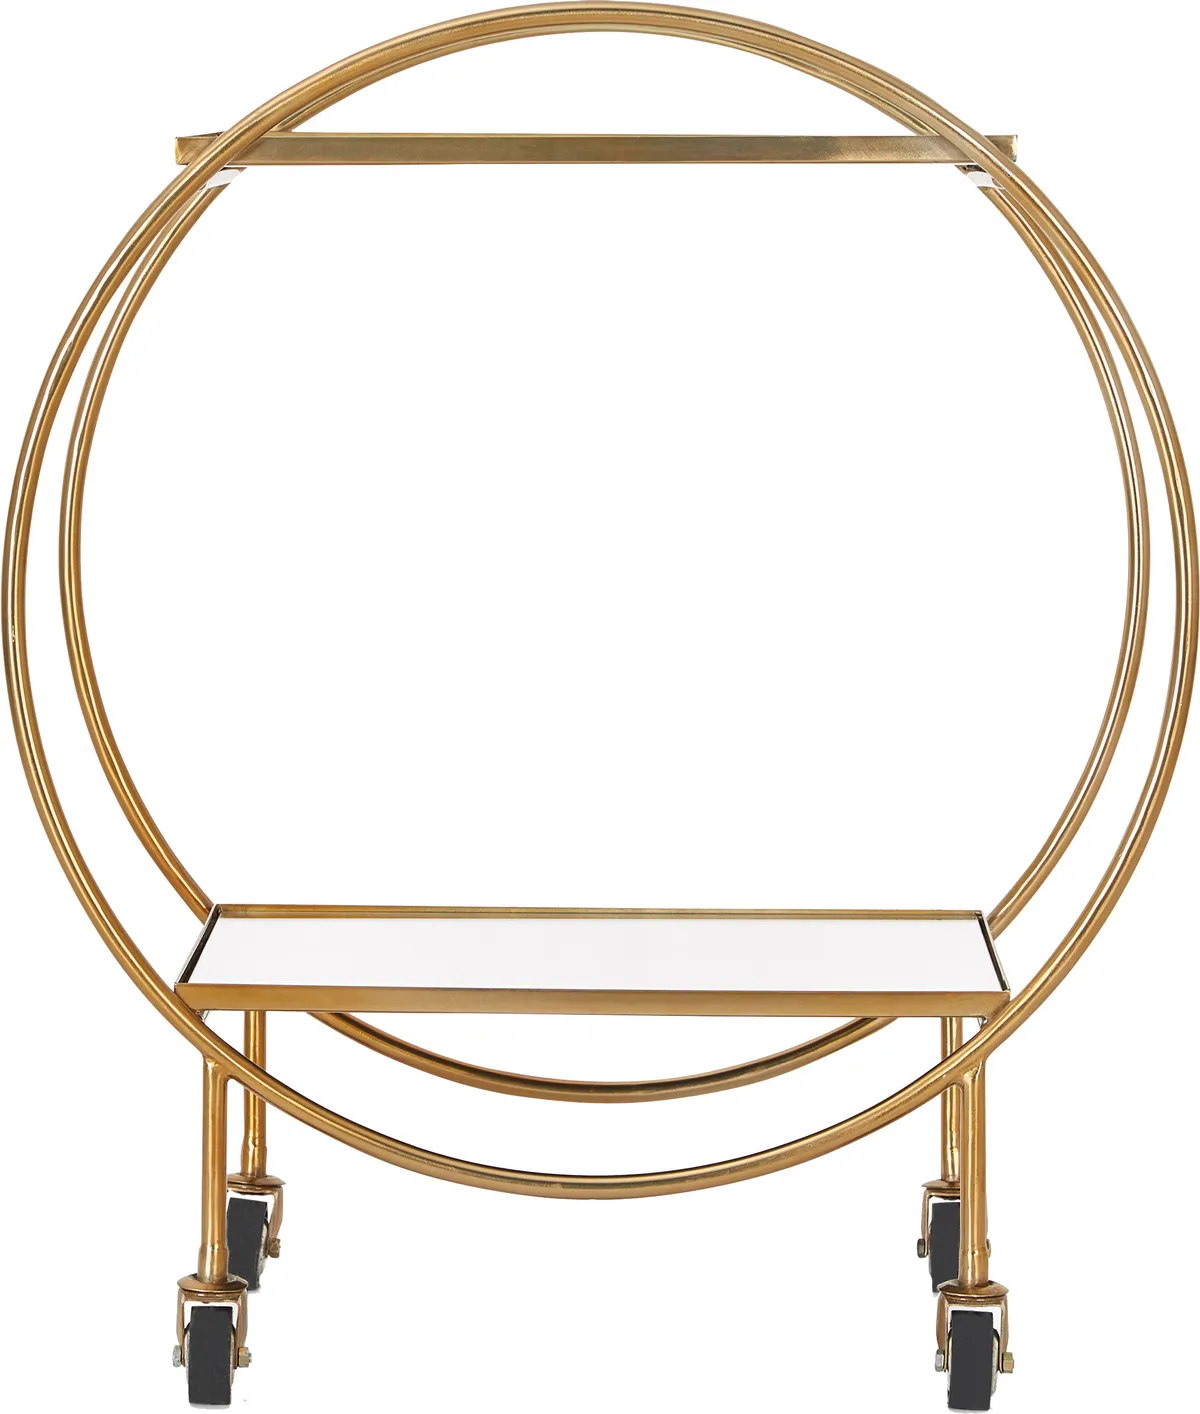 Bar drinks trolley in Gold, £125, Next